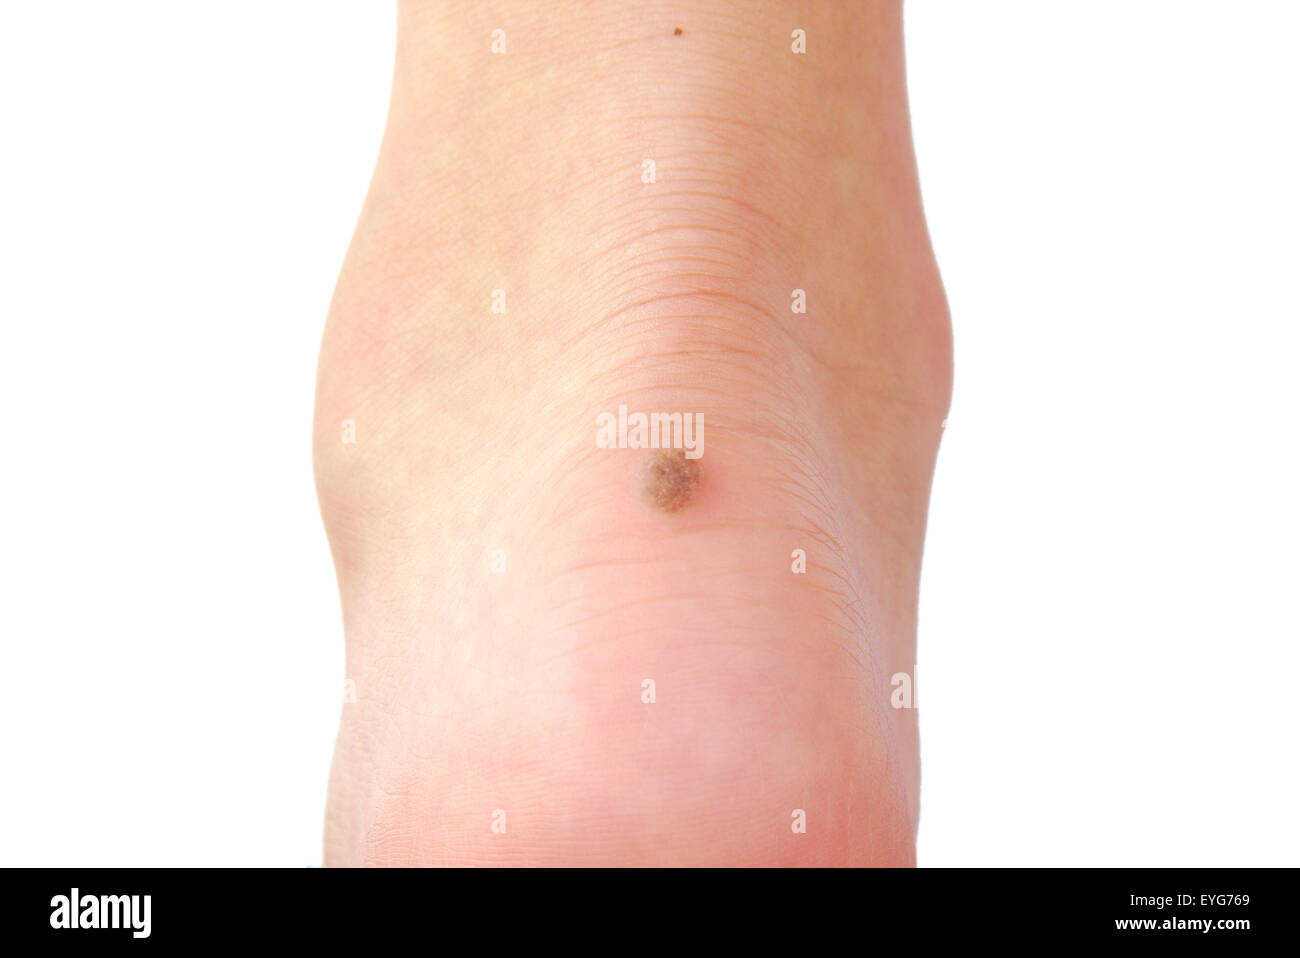 Wart on a person's heel close up Stock Photo